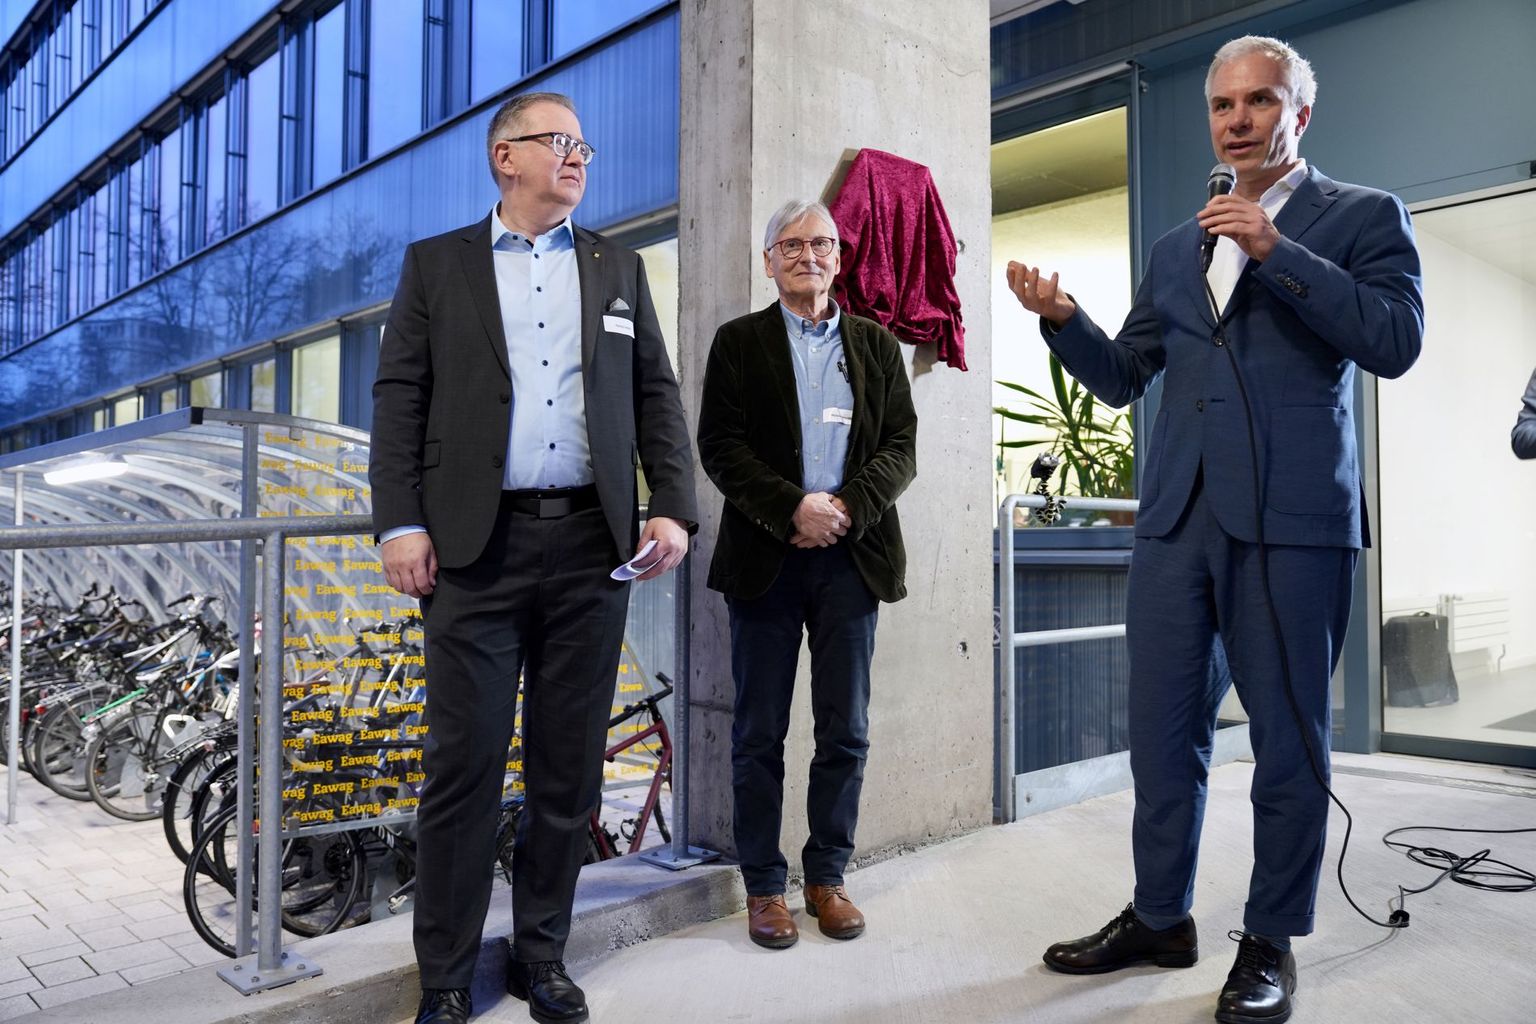 Patrick Schärli, president of the municipal council of Dübendorf, Philippe Moreillon, president of SCNAT, and Martin Ackermann, director of Eawag, at the unveiling of the plaque.